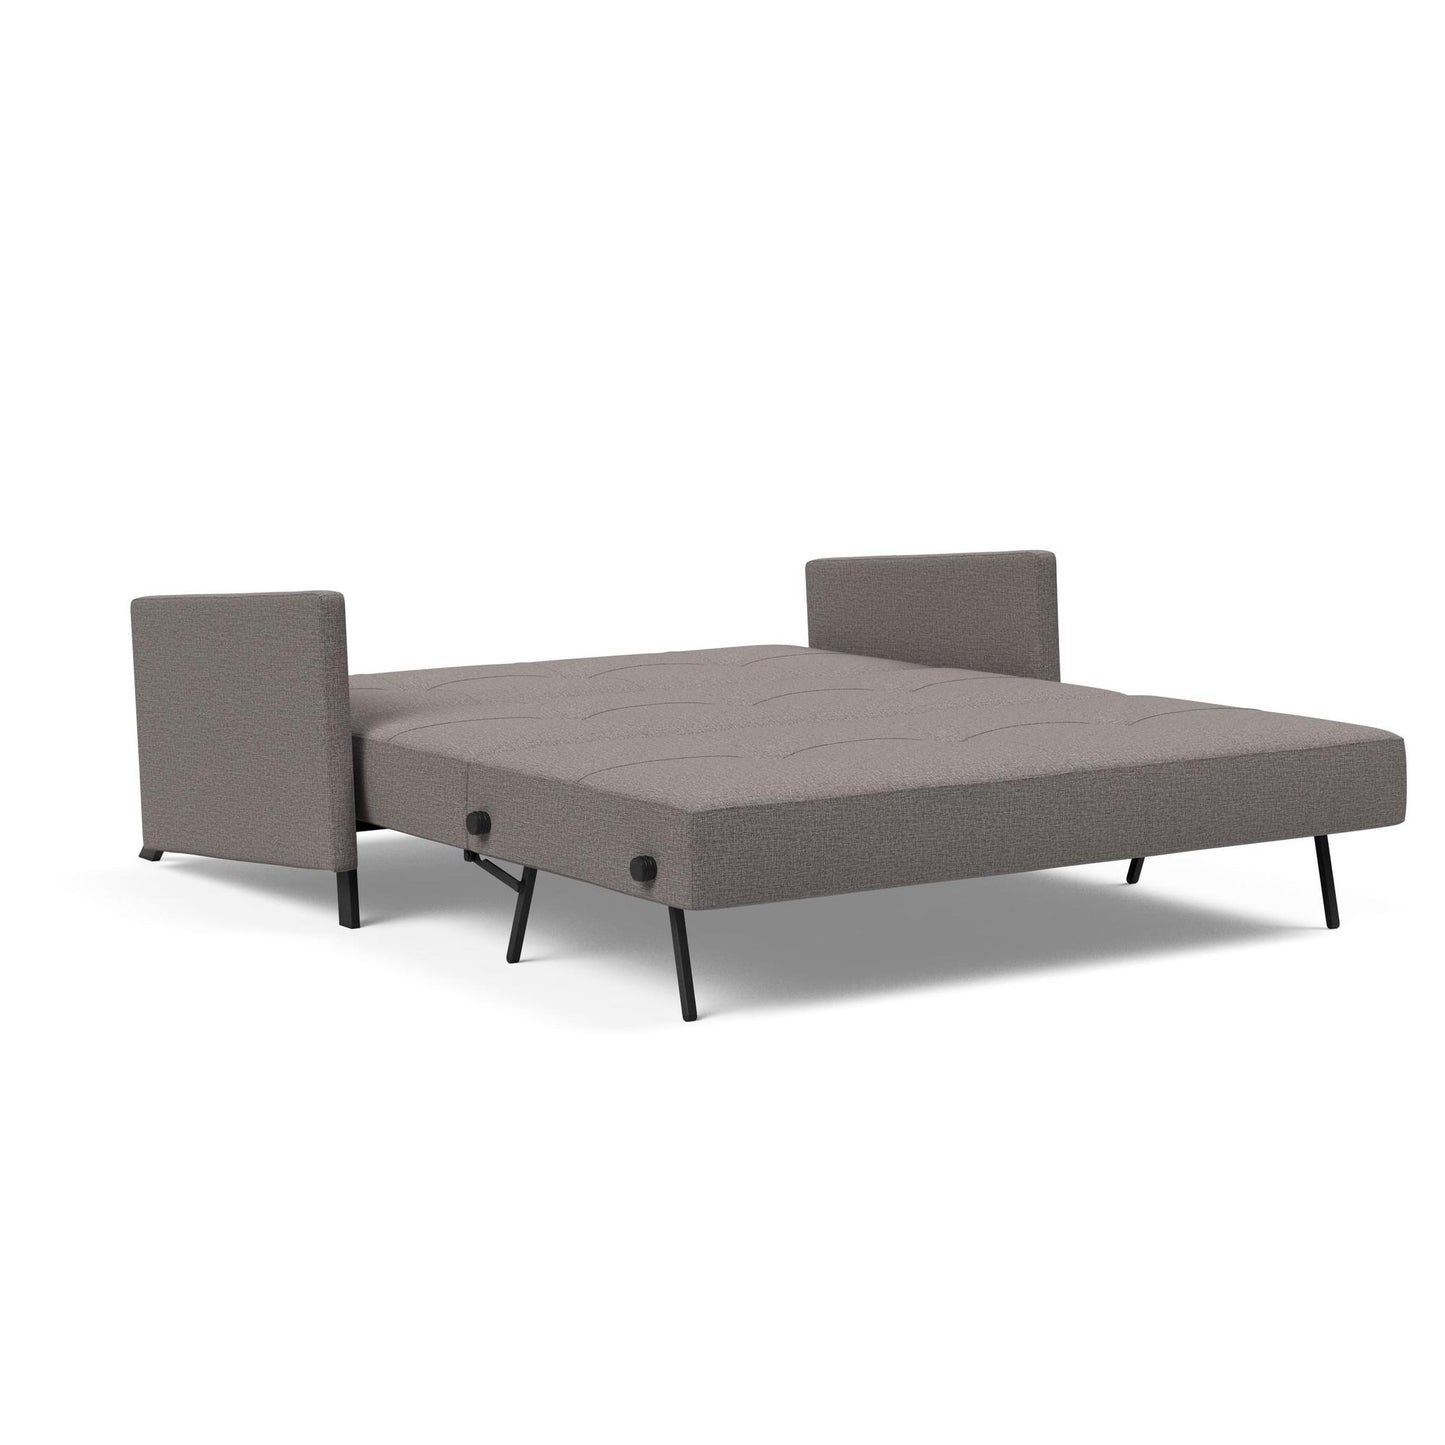 Cubed Deluxe Queen Sofa Bed w/Arms in Mixed Dance Gray